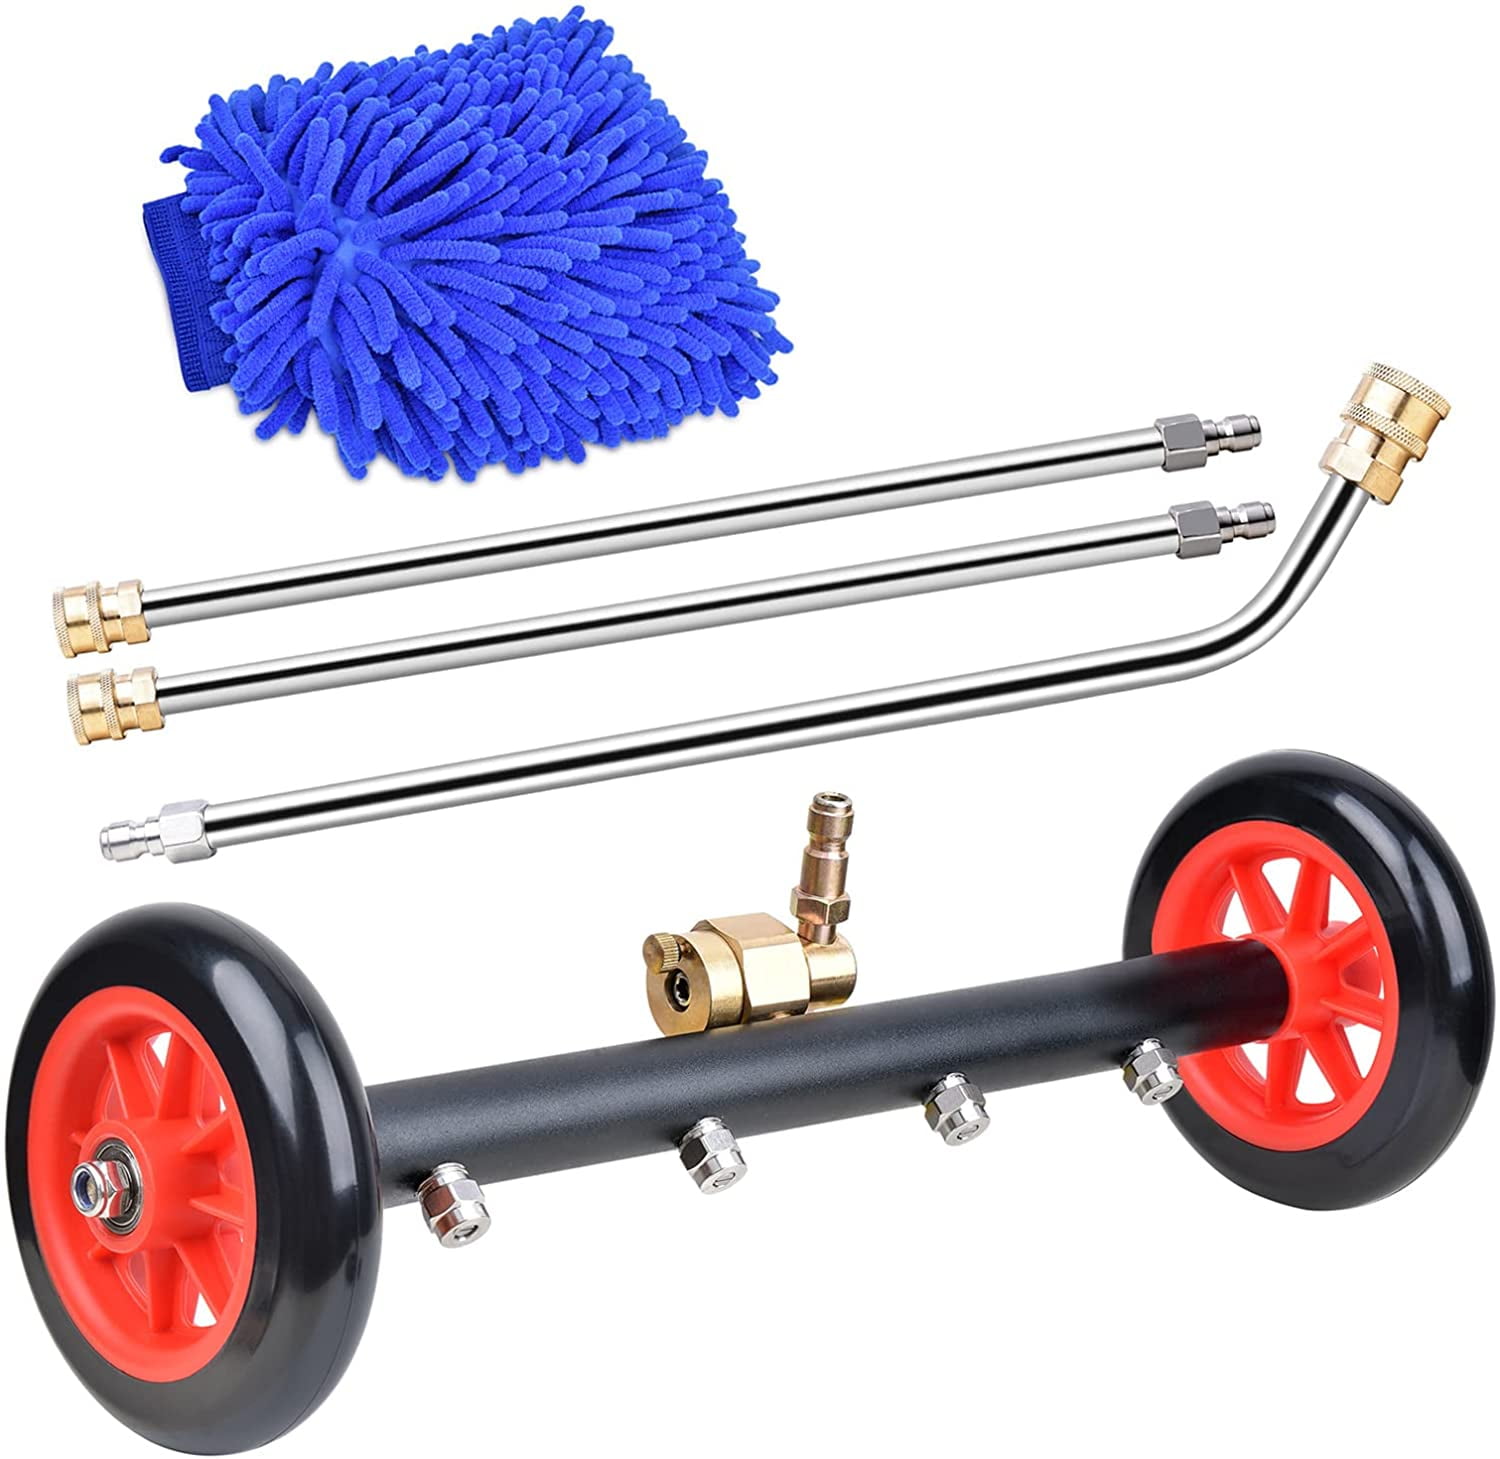 Under Car Water Broom Car Wash w/Roller Labor Saving Stainless Steel&Plastic 